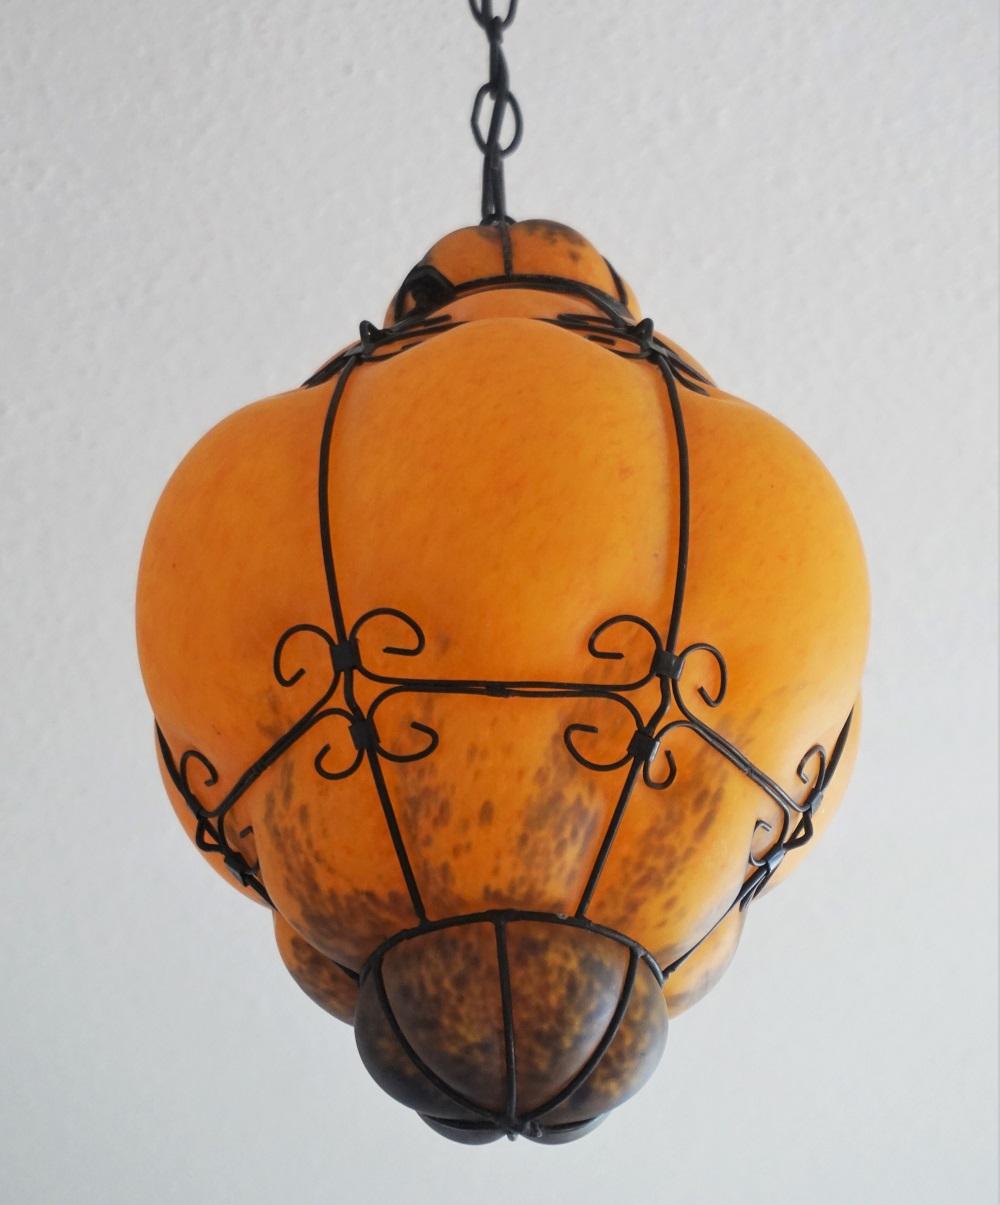 Murano Handcrafted Colored Glass Wrought Iron Pendant or Lantern, Venice, Italy In Good Condition For Sale In Frankfurt am Main, DE